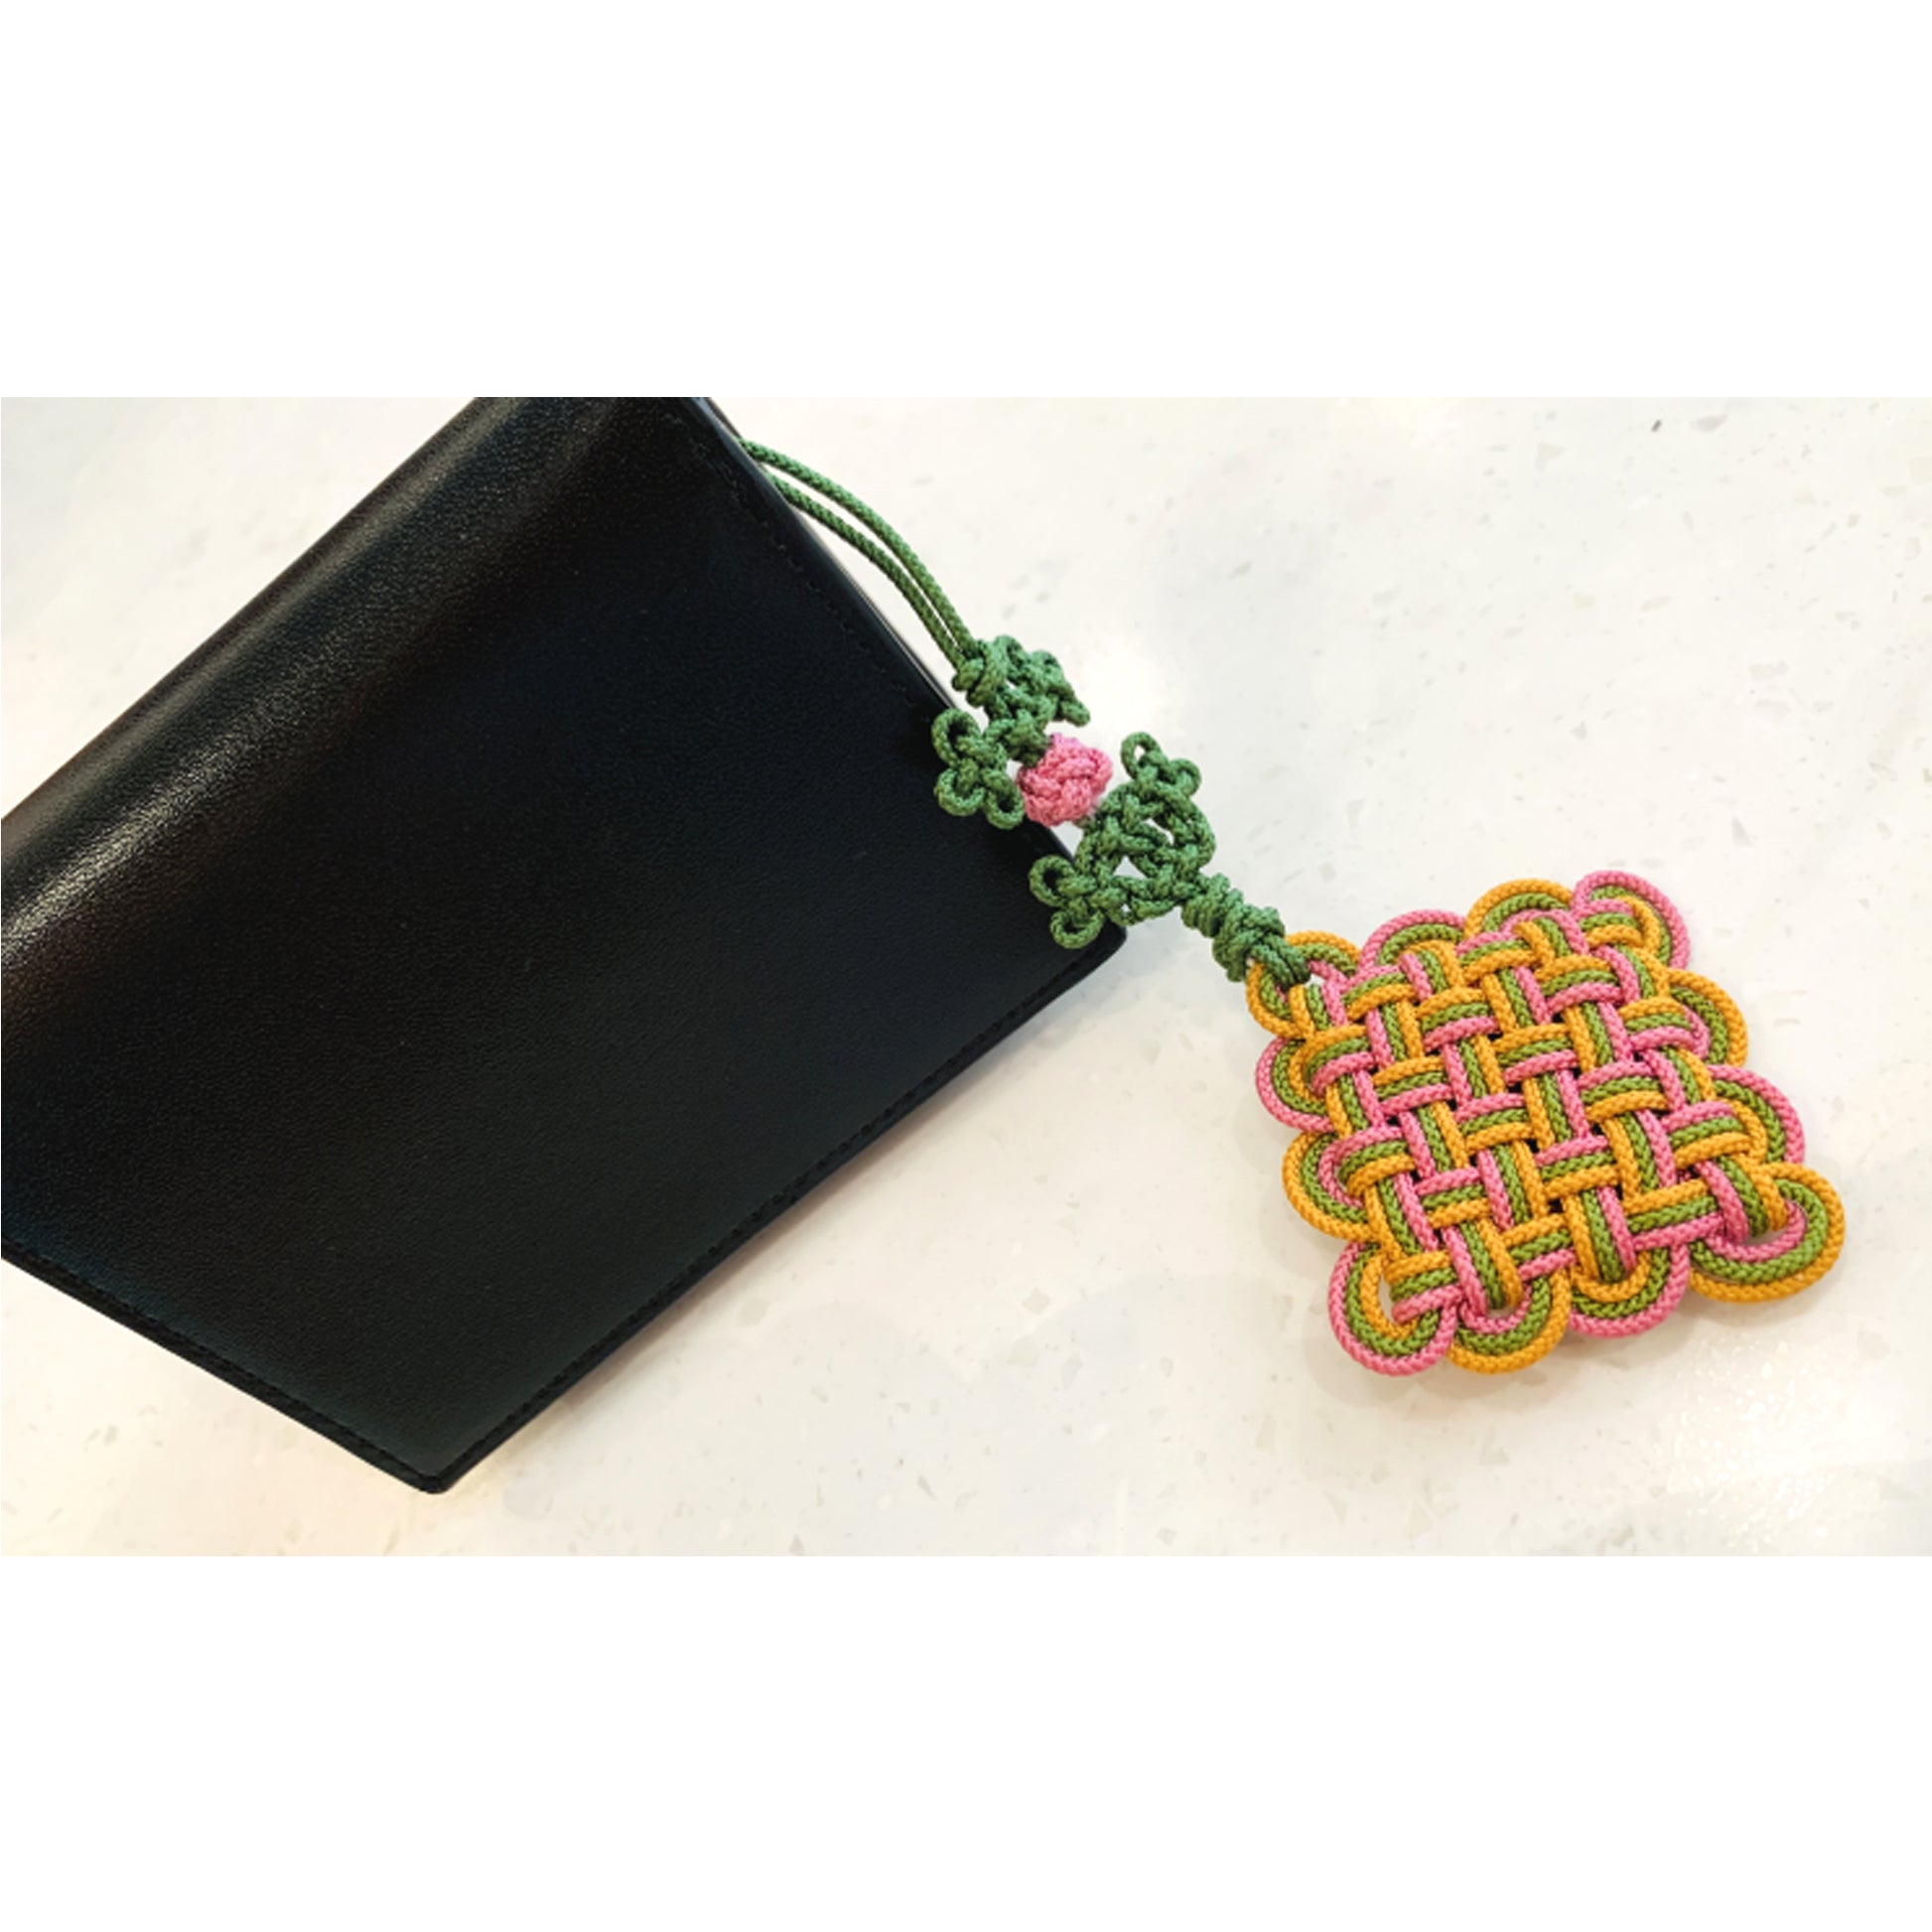 Korea traditional Knot Key chain with black pulse, main color green, pink, yellow